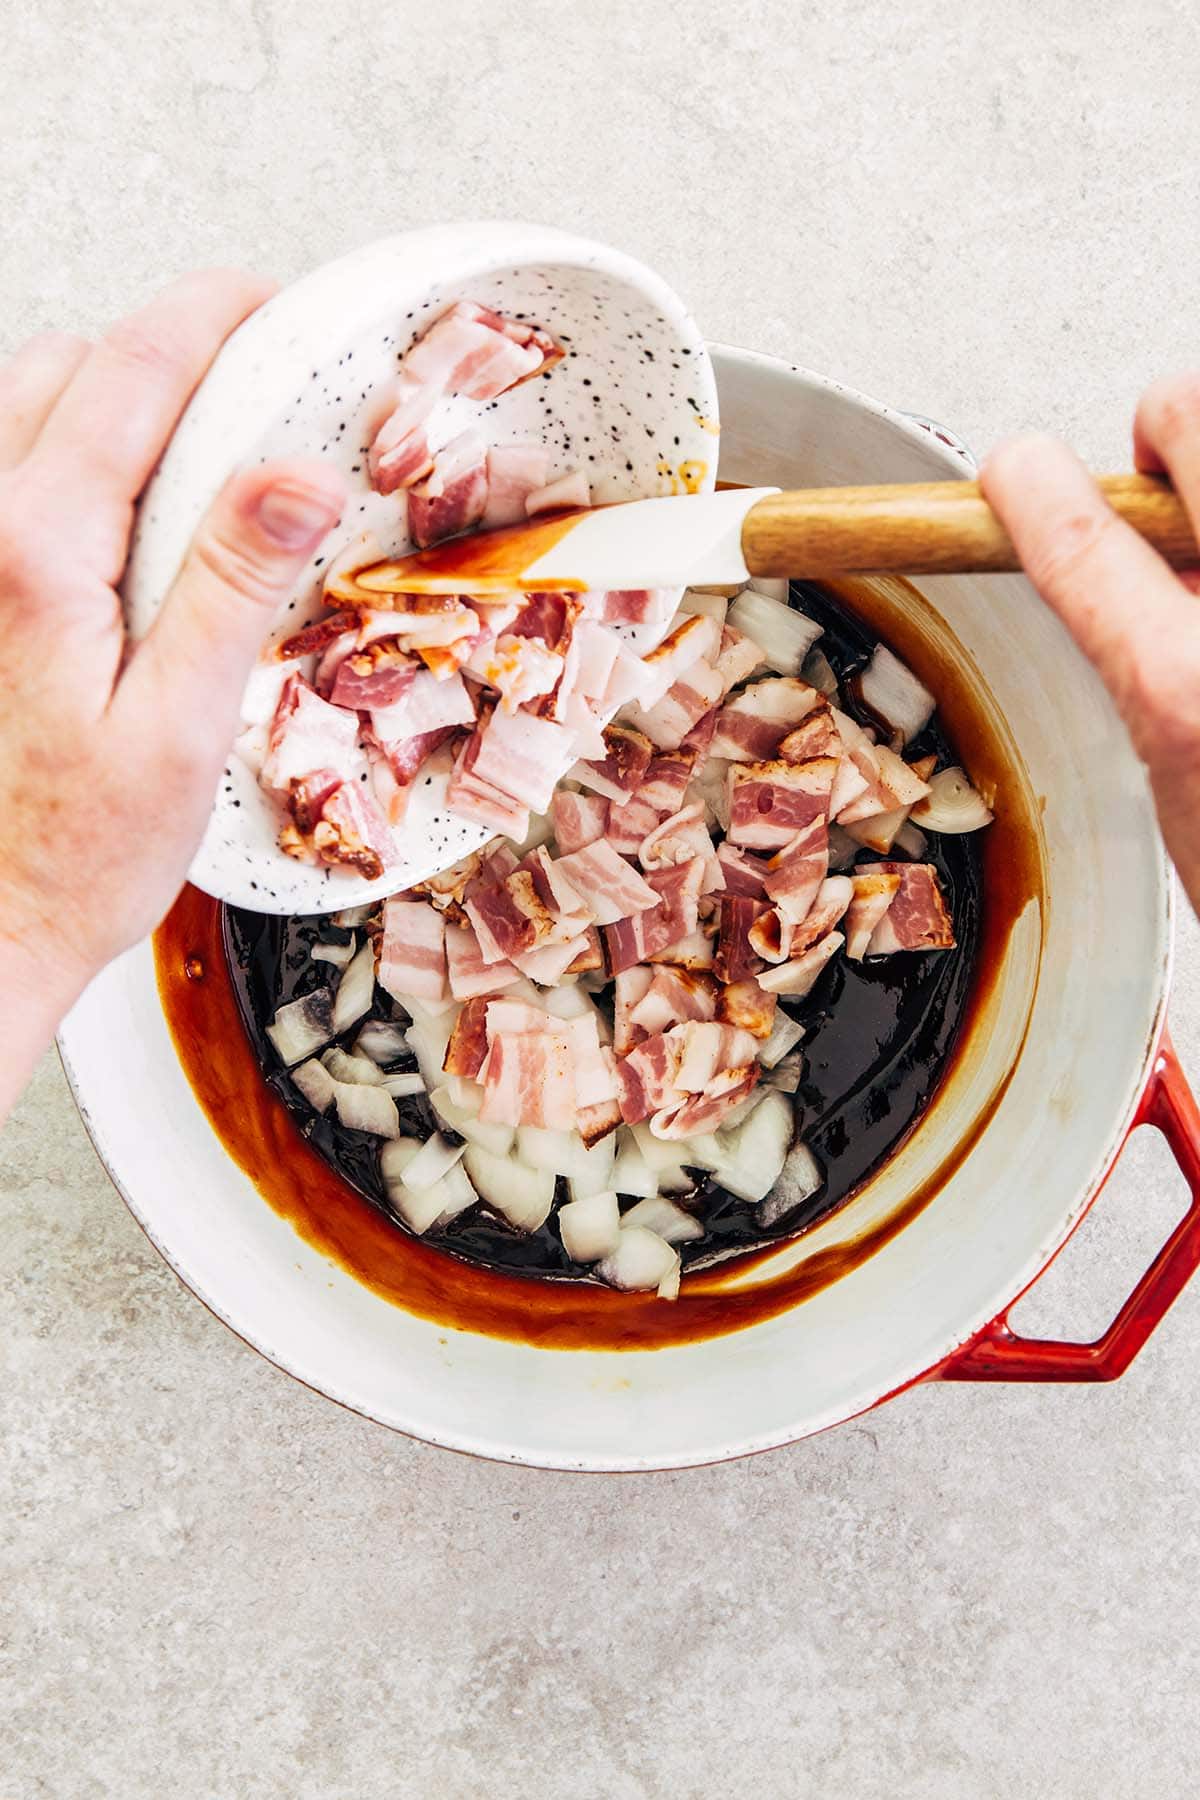 Hands scraping chopped bacon from a bowl into a pot of onion and molasses mixture.